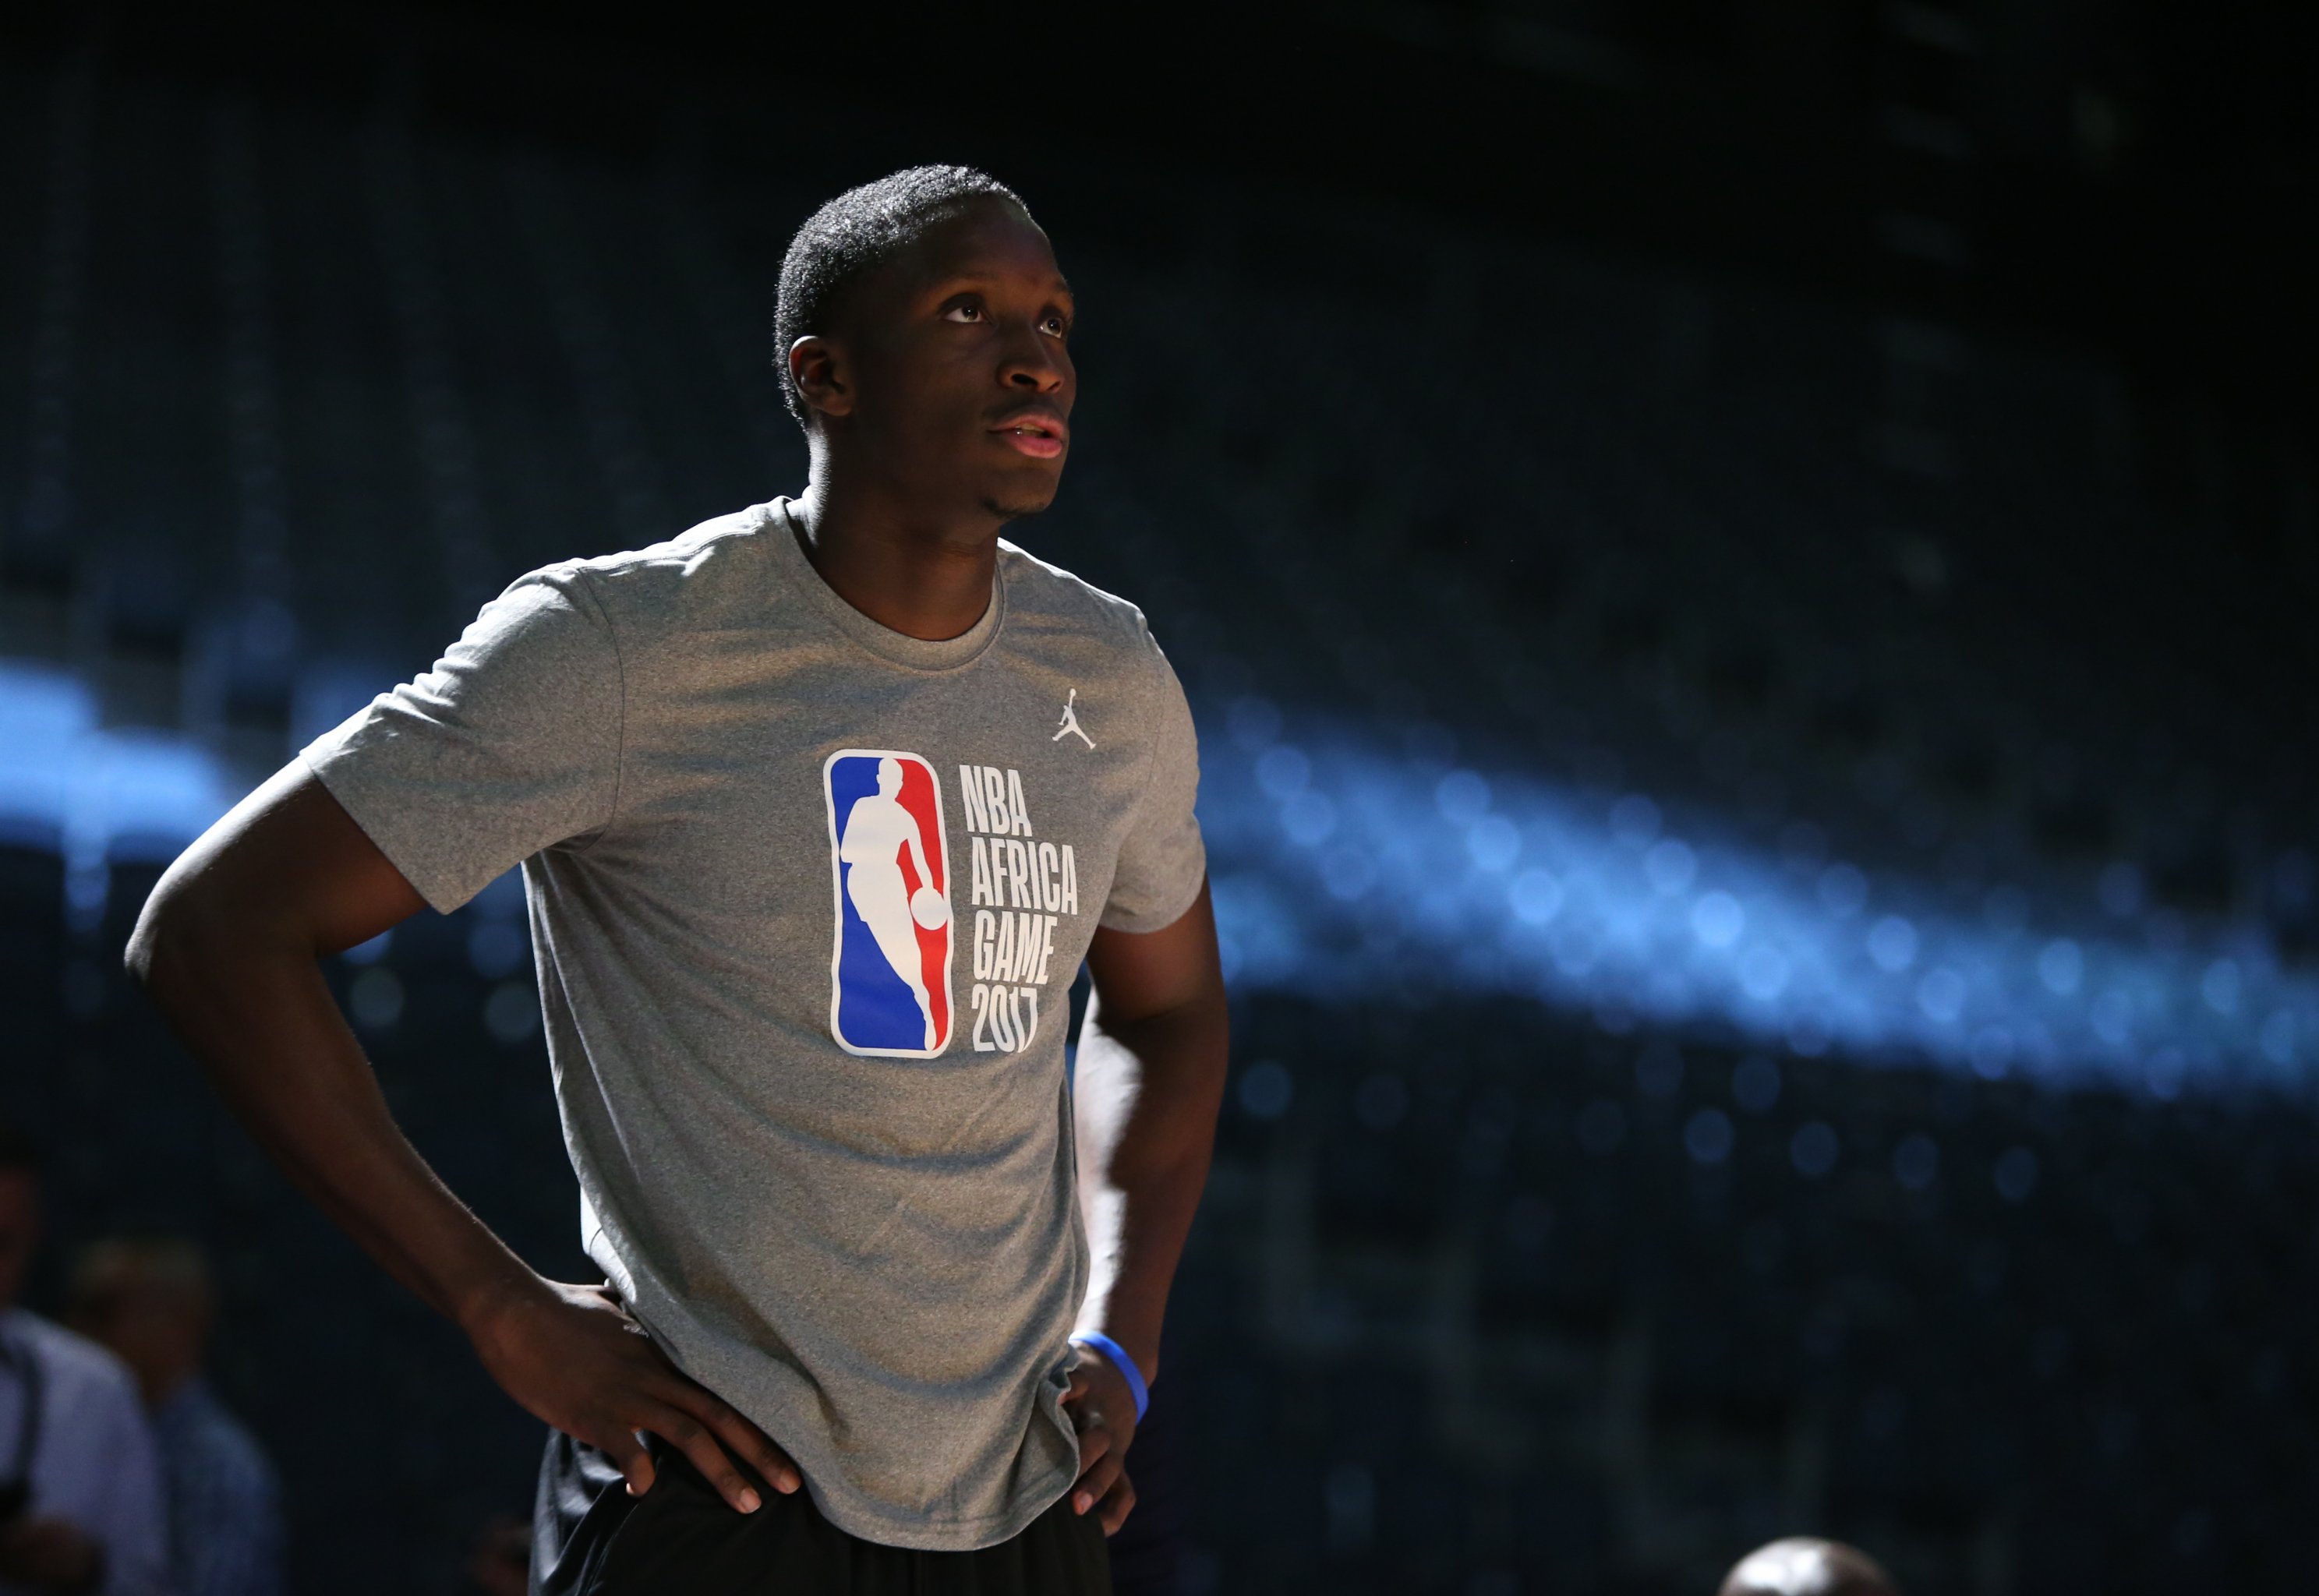 NBA Star Victor Oladipo Breaks Down His R&B EP 'Songs for You